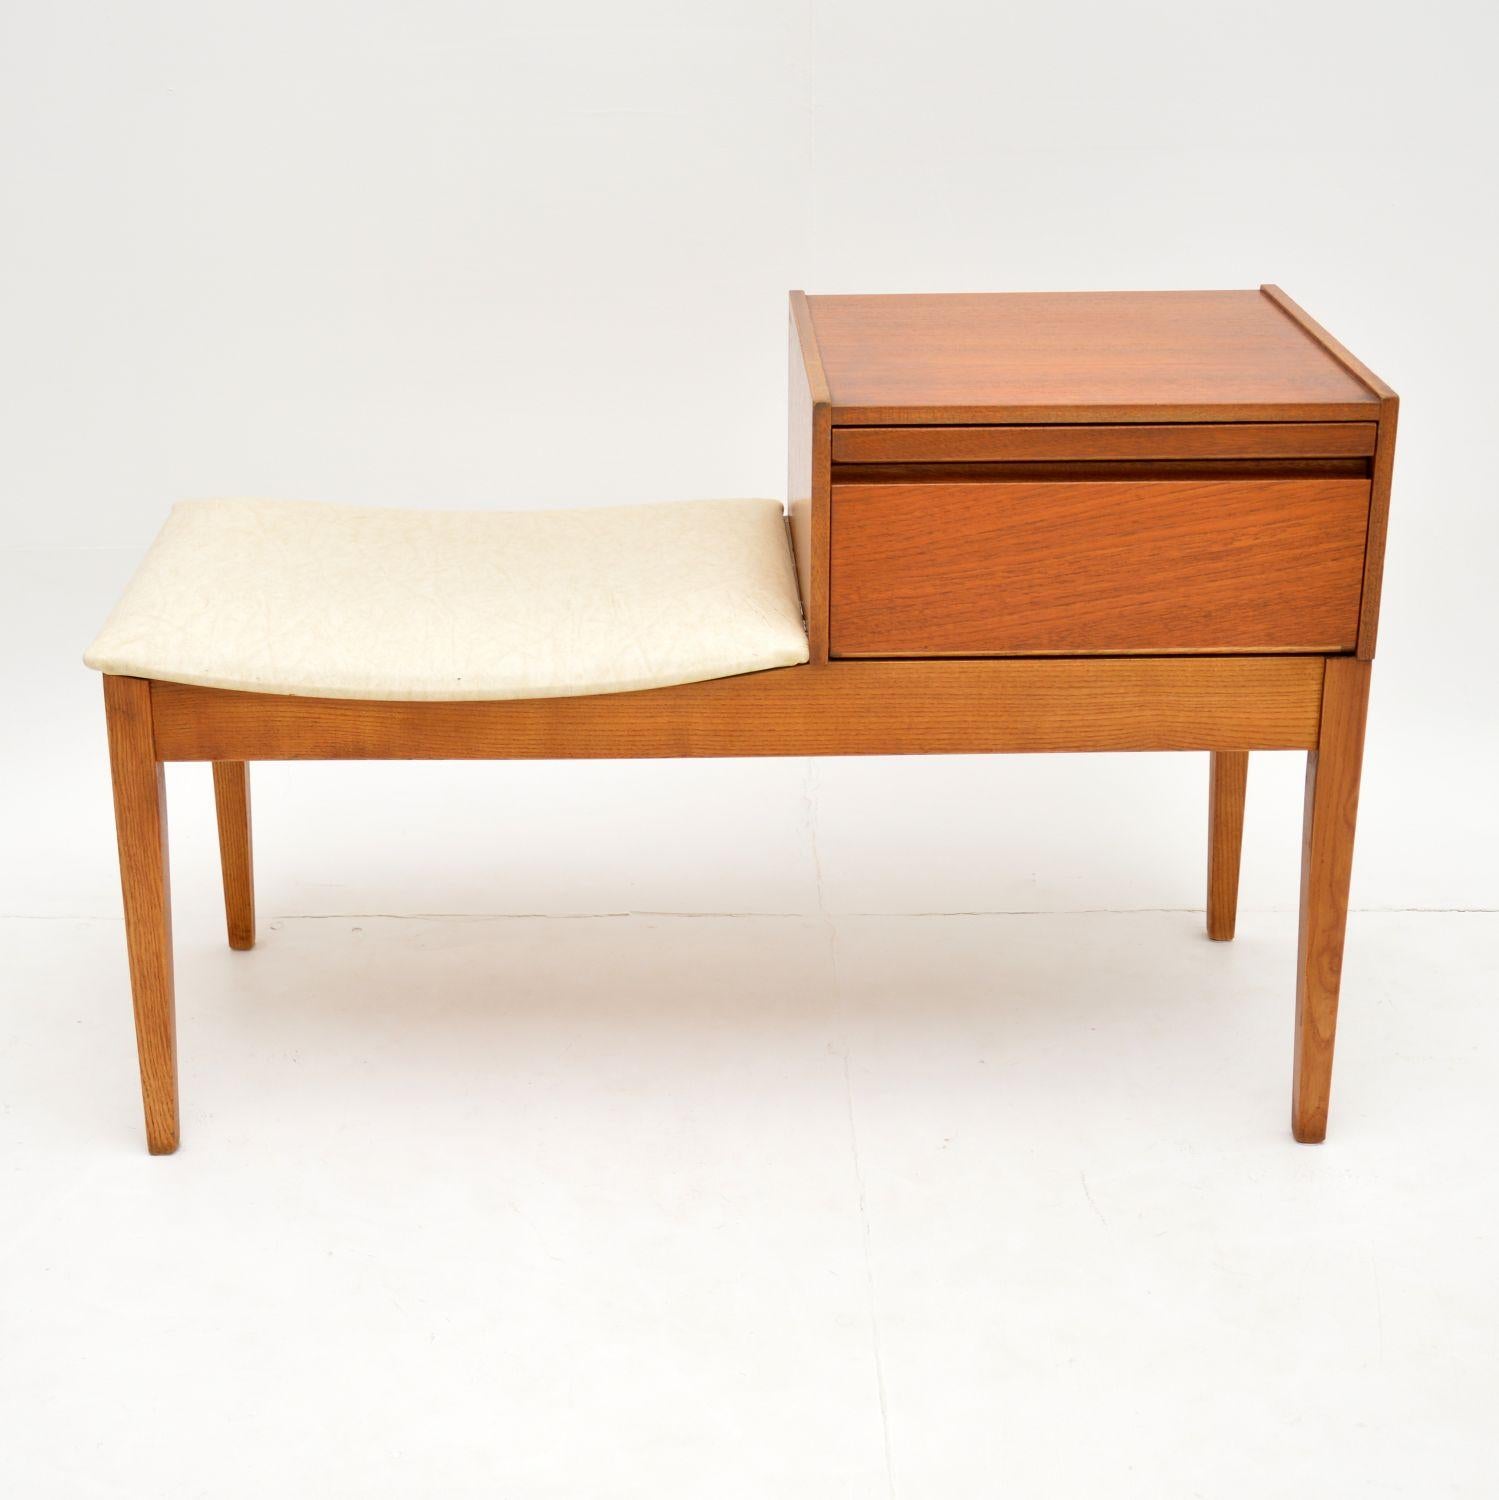 A stylish and beautifully made telephone entry way bench in teak. This dates from the 1960s, and is in lovely original condition. We have just given the teak frame a light clean and oiling. It is sturdy and sound, the original cream vinyl seat is in